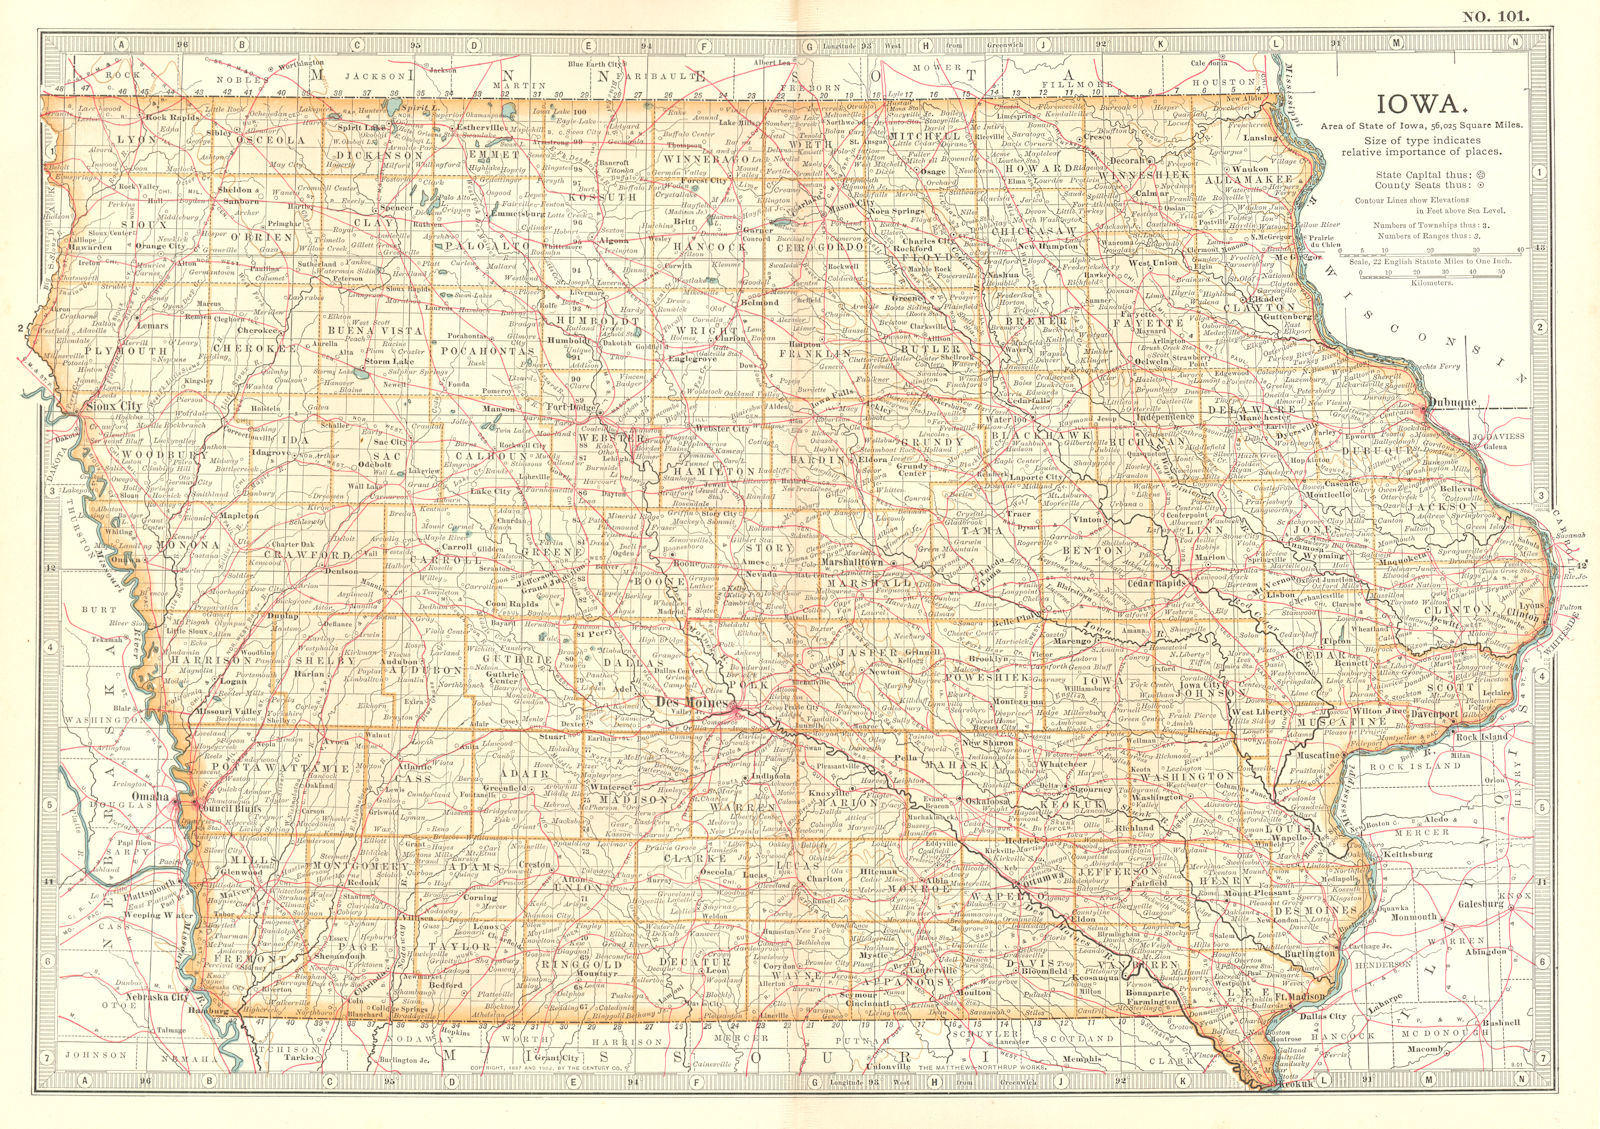 IOWA. State map showing counties. Britannica 10th edition. 1903 old